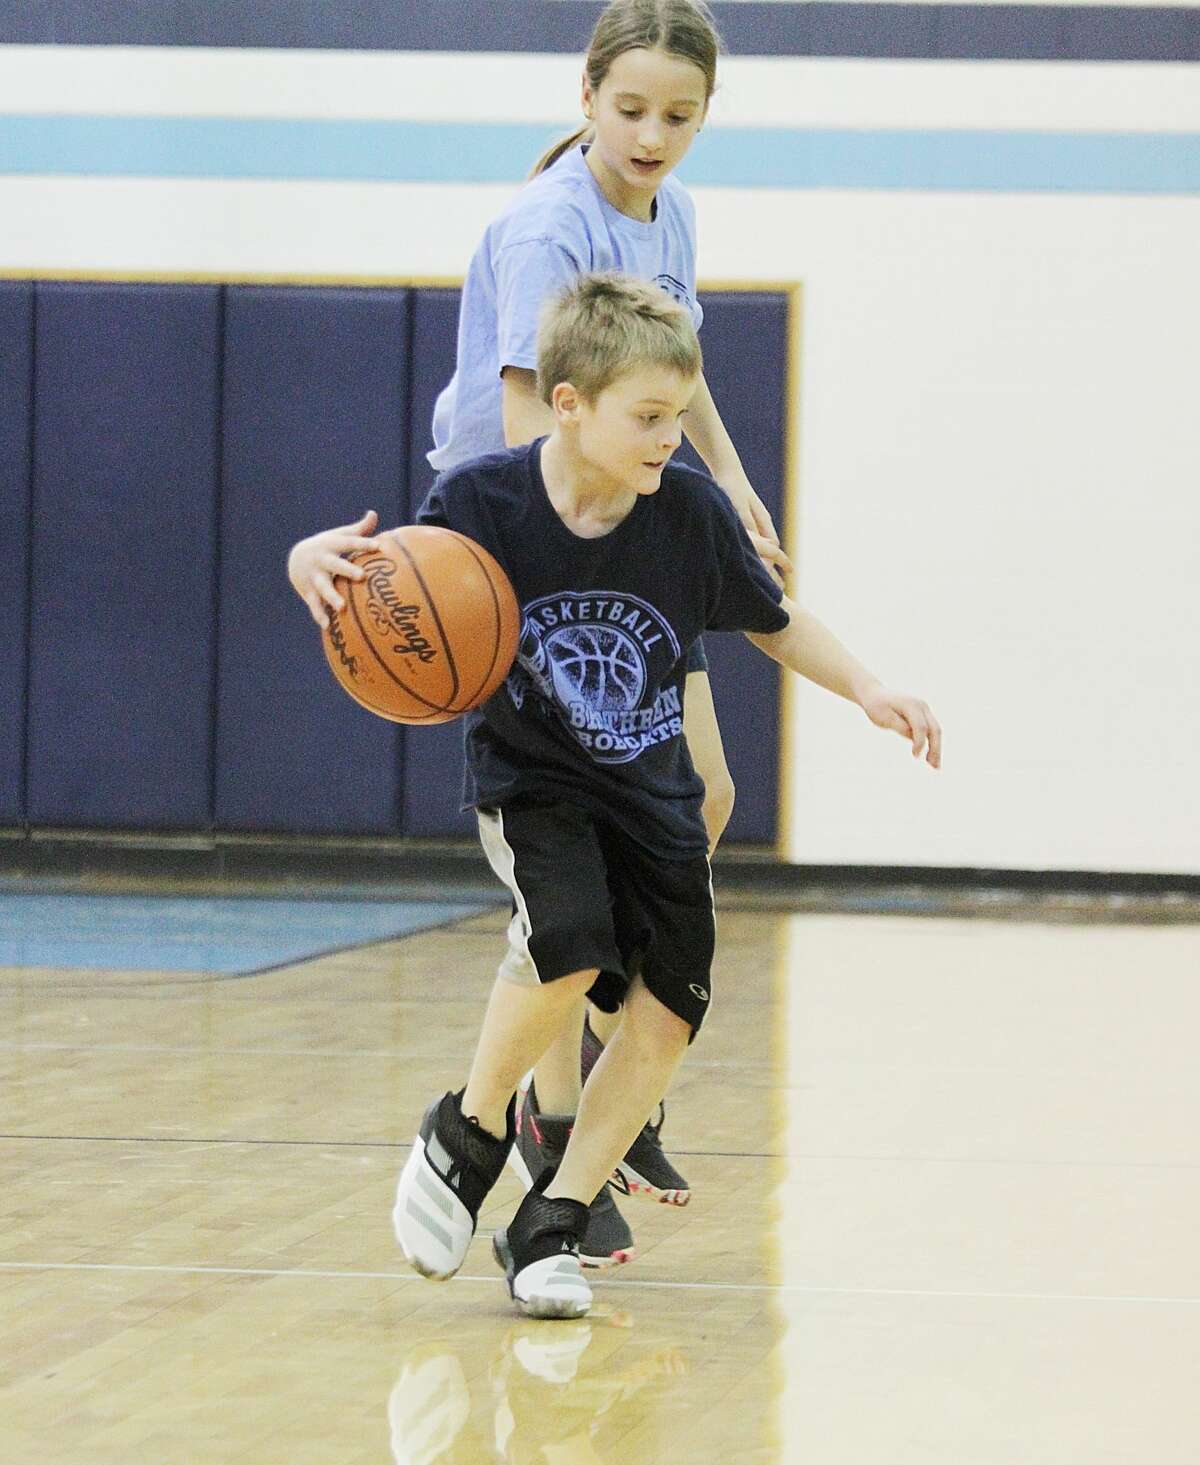 Ryder Girven is defended by Ava Seibert during a recent Brethren FUNdamentals youth game at halftime of the Bobcats' varsity contest.